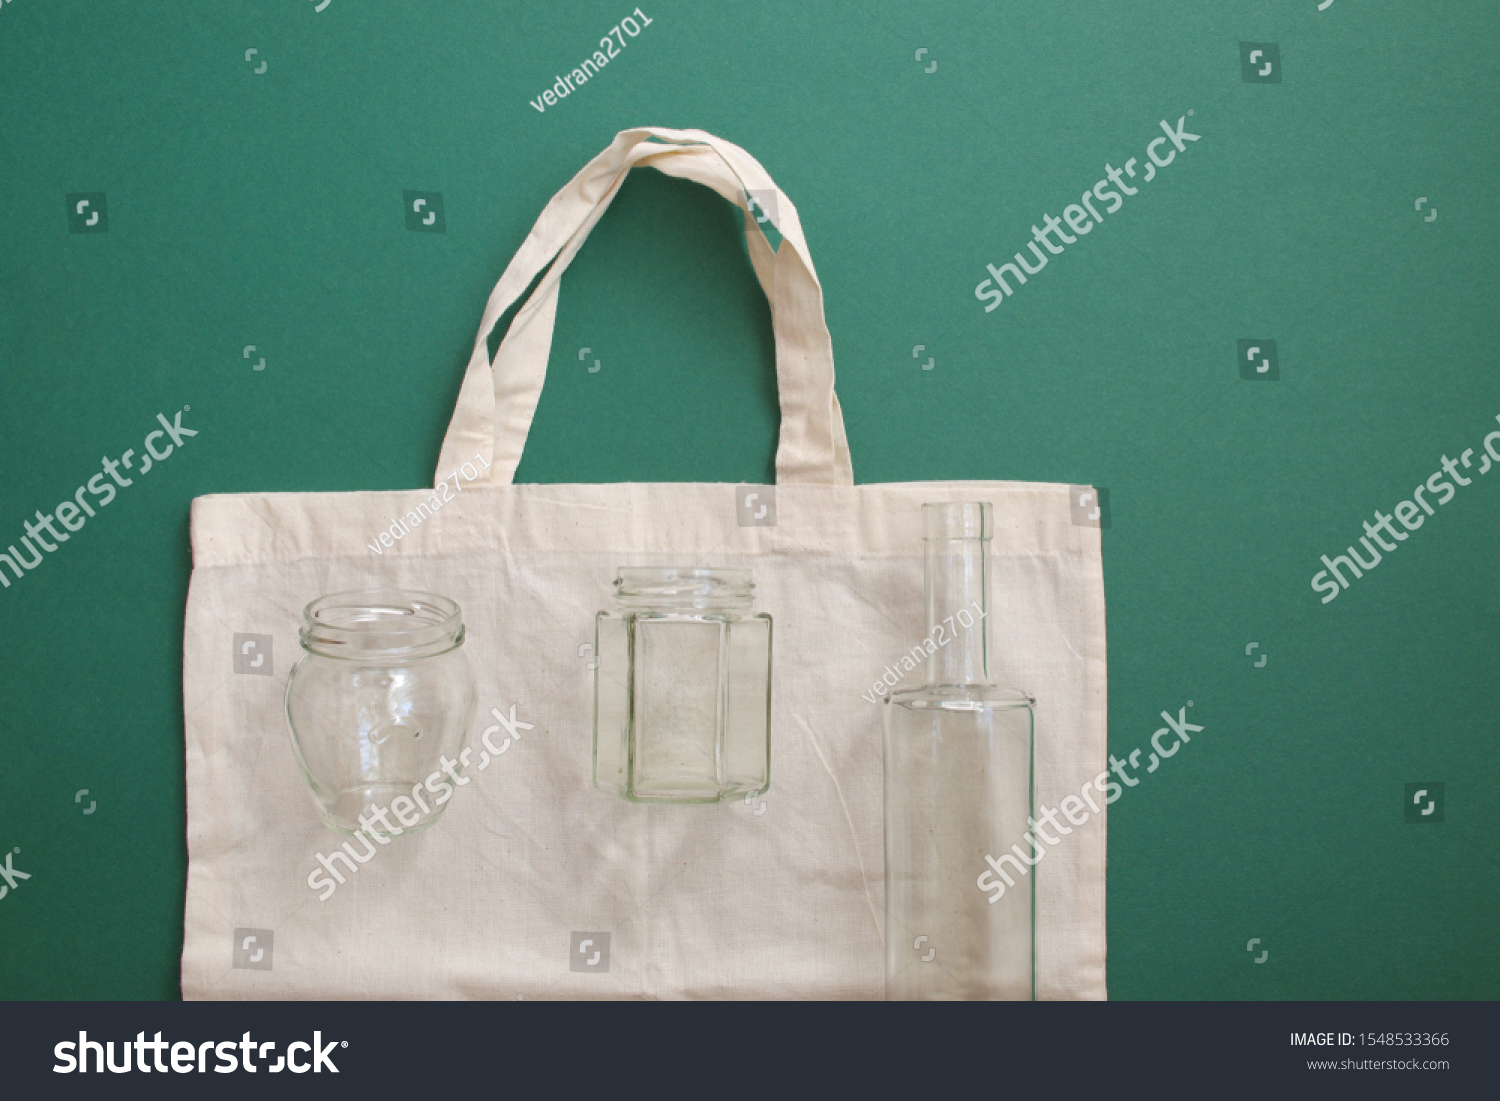 Reusable shopping bag and reusable glass bottles against the green background #1548533366